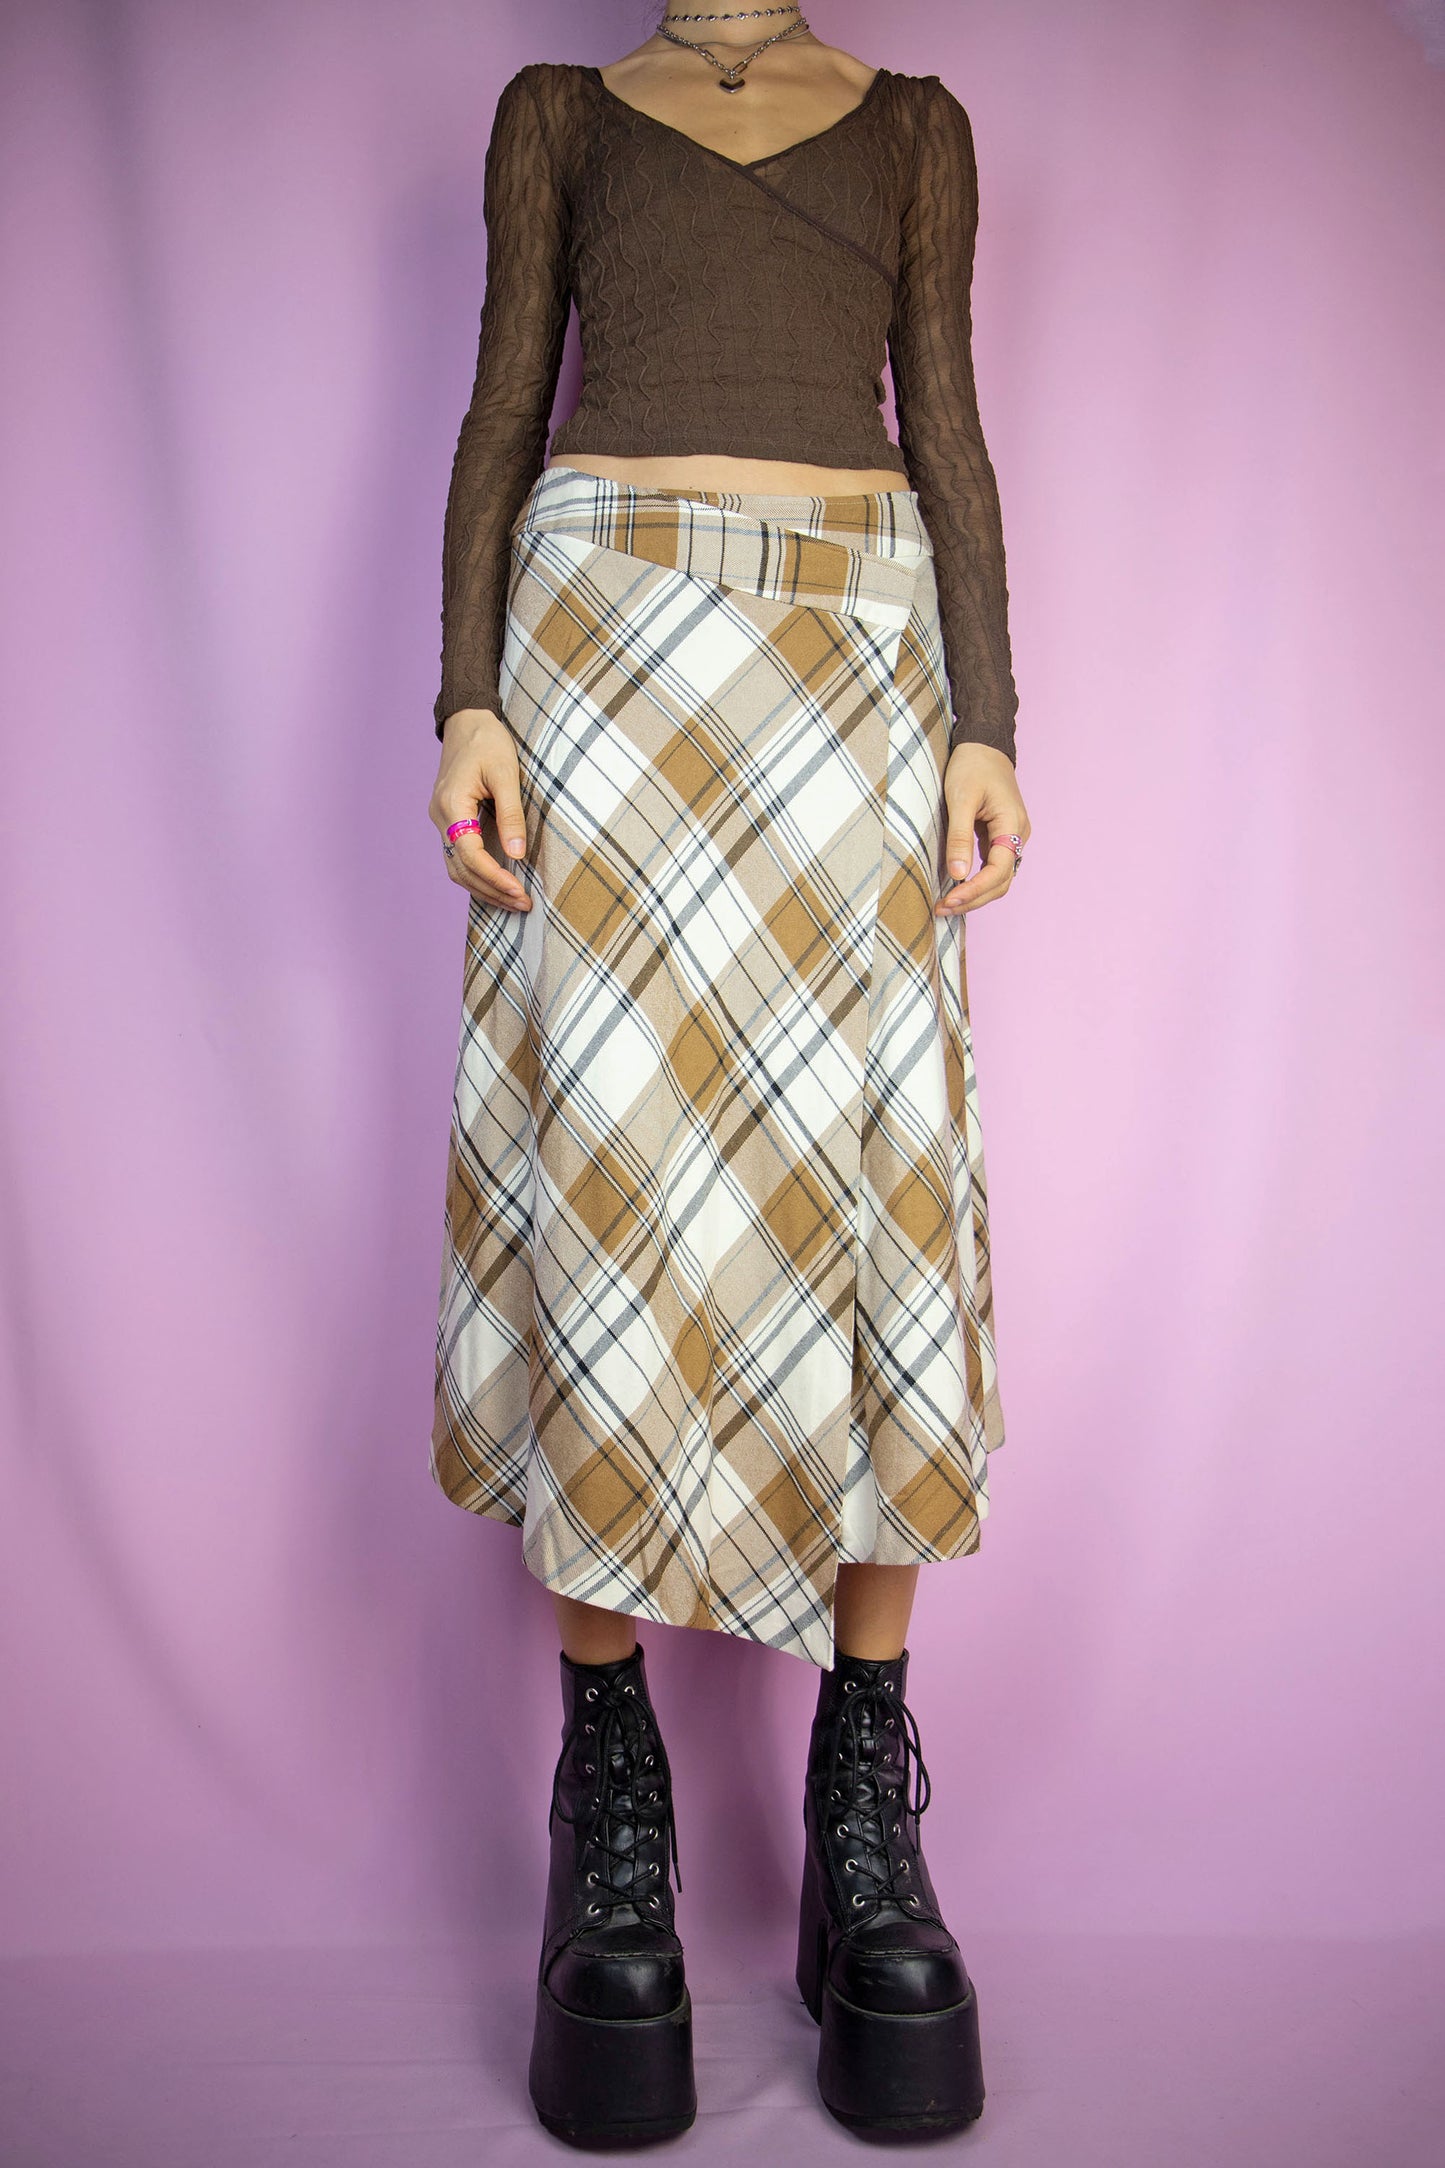 The Vintage Y2K Brown Plaid Midi Skirt is an asymmetrical wrap skirt in brown and beige checkered pattern, featuring a side zipper closure. This gorgeous piece reflects the dark academia preppy style and is a knit maxi skirt from the 2000s.